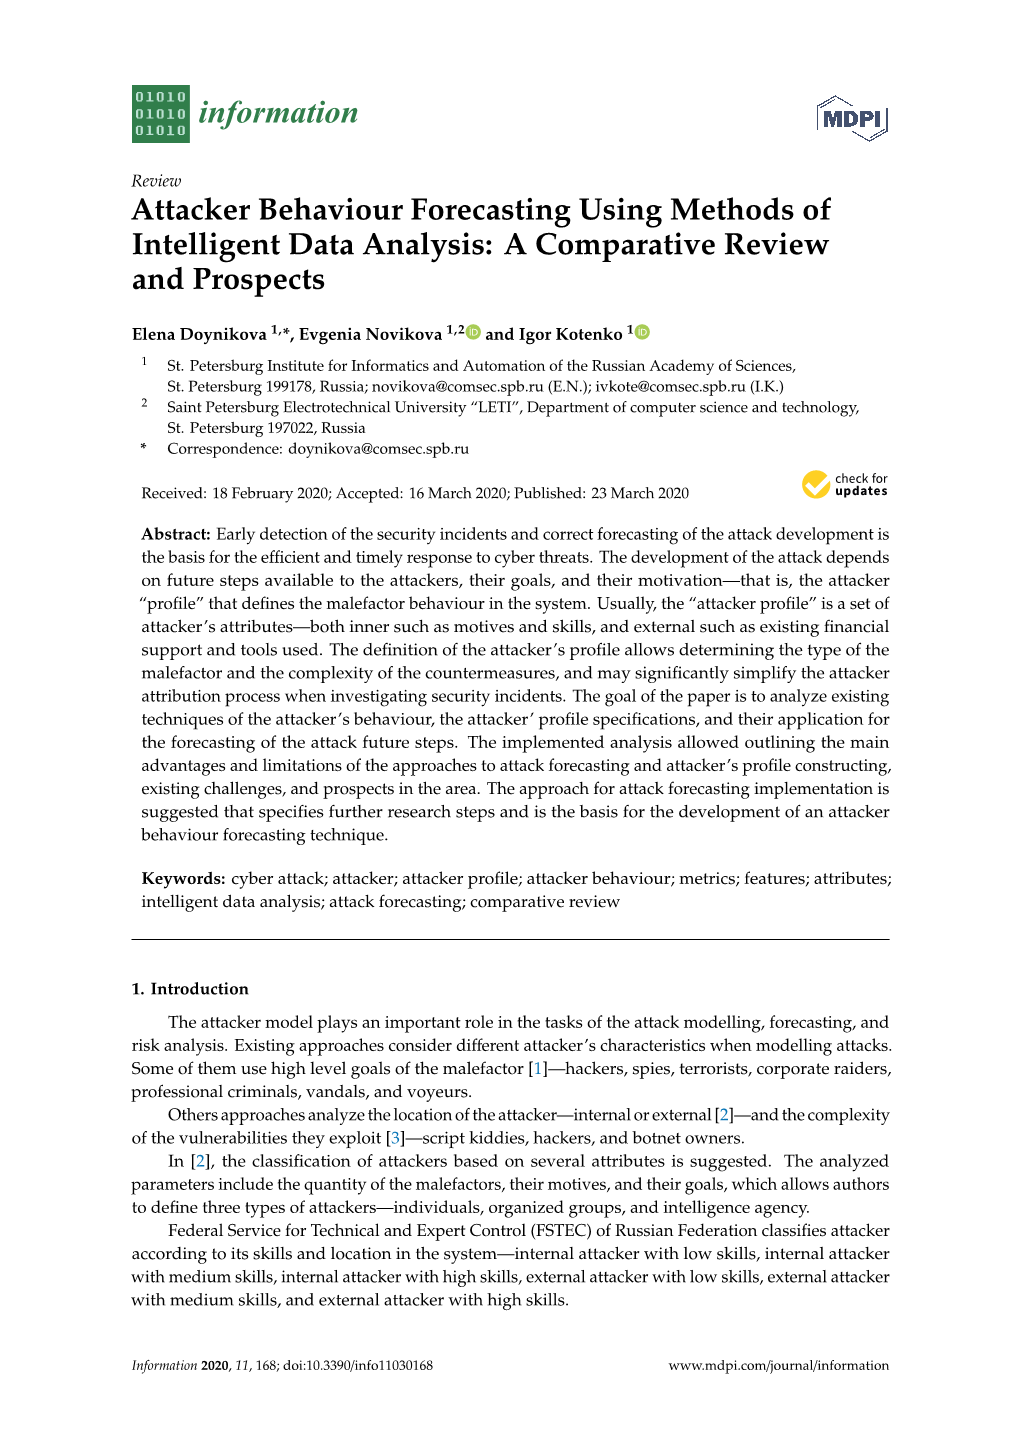 Attacker Behaviour Forecasting Using Methods of Intelligent Data Analysis: a Comparative Review and Prospects